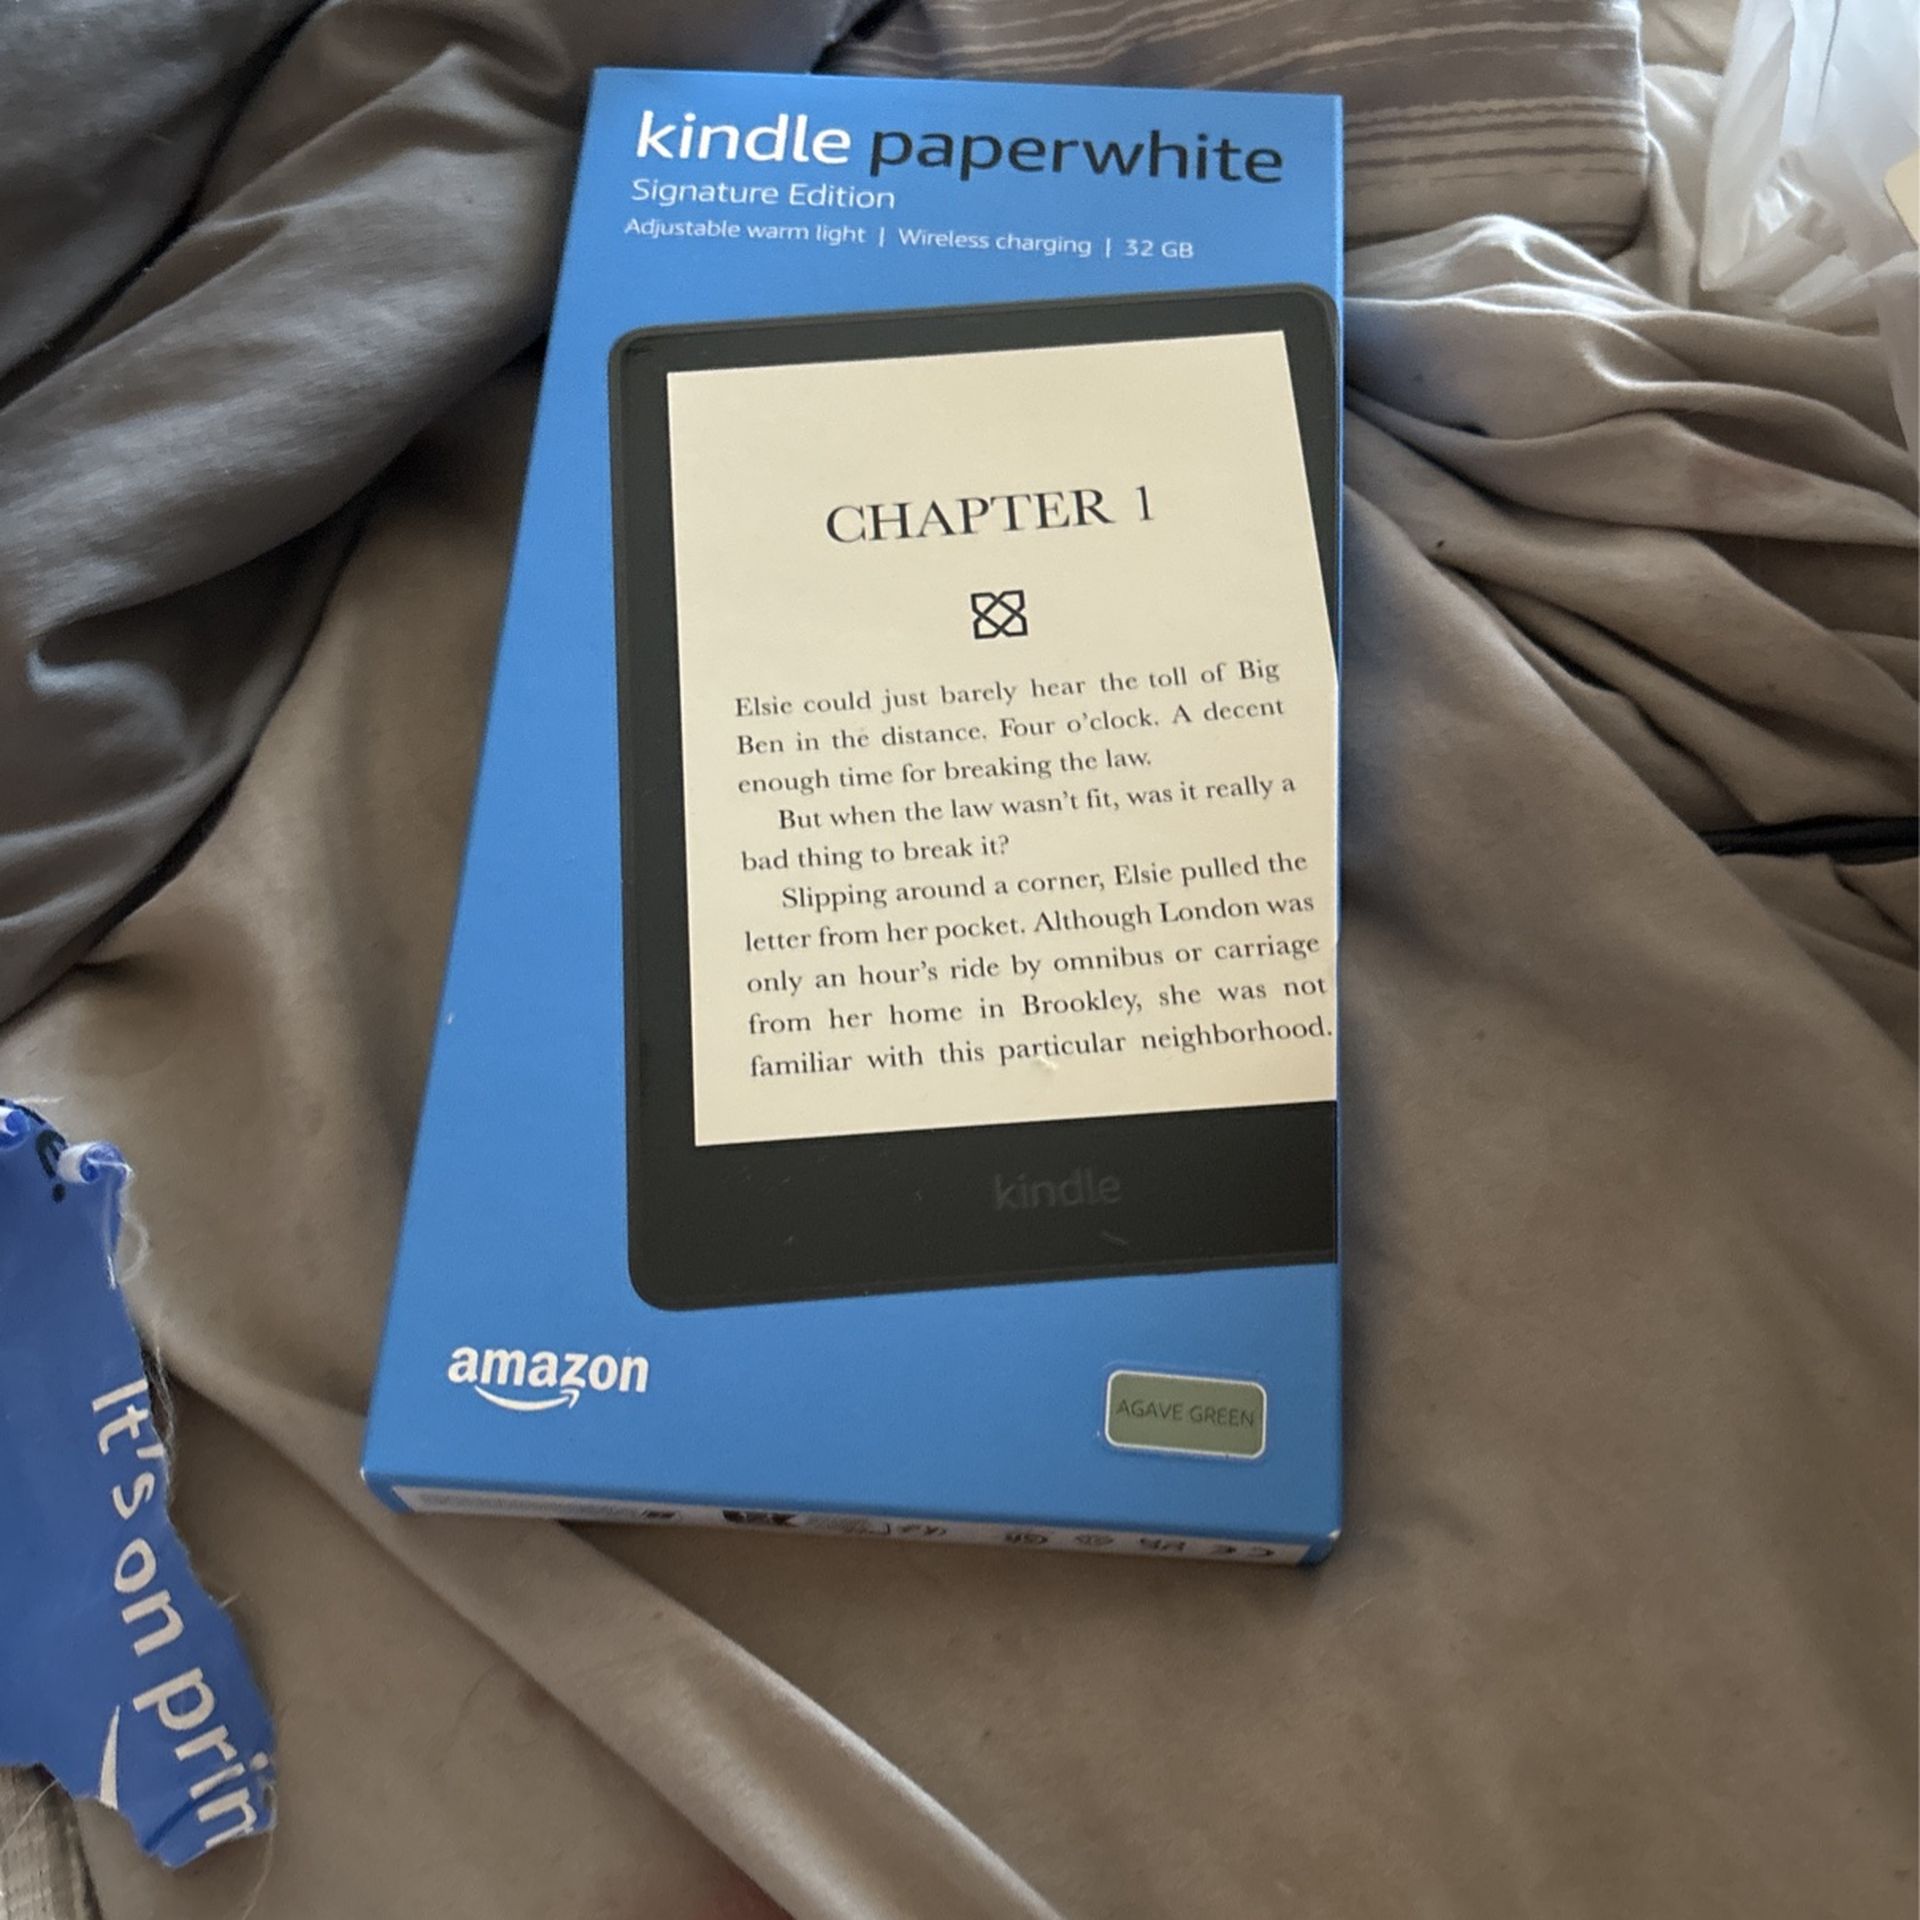 Brand new in box kindle paper white Agave Green 